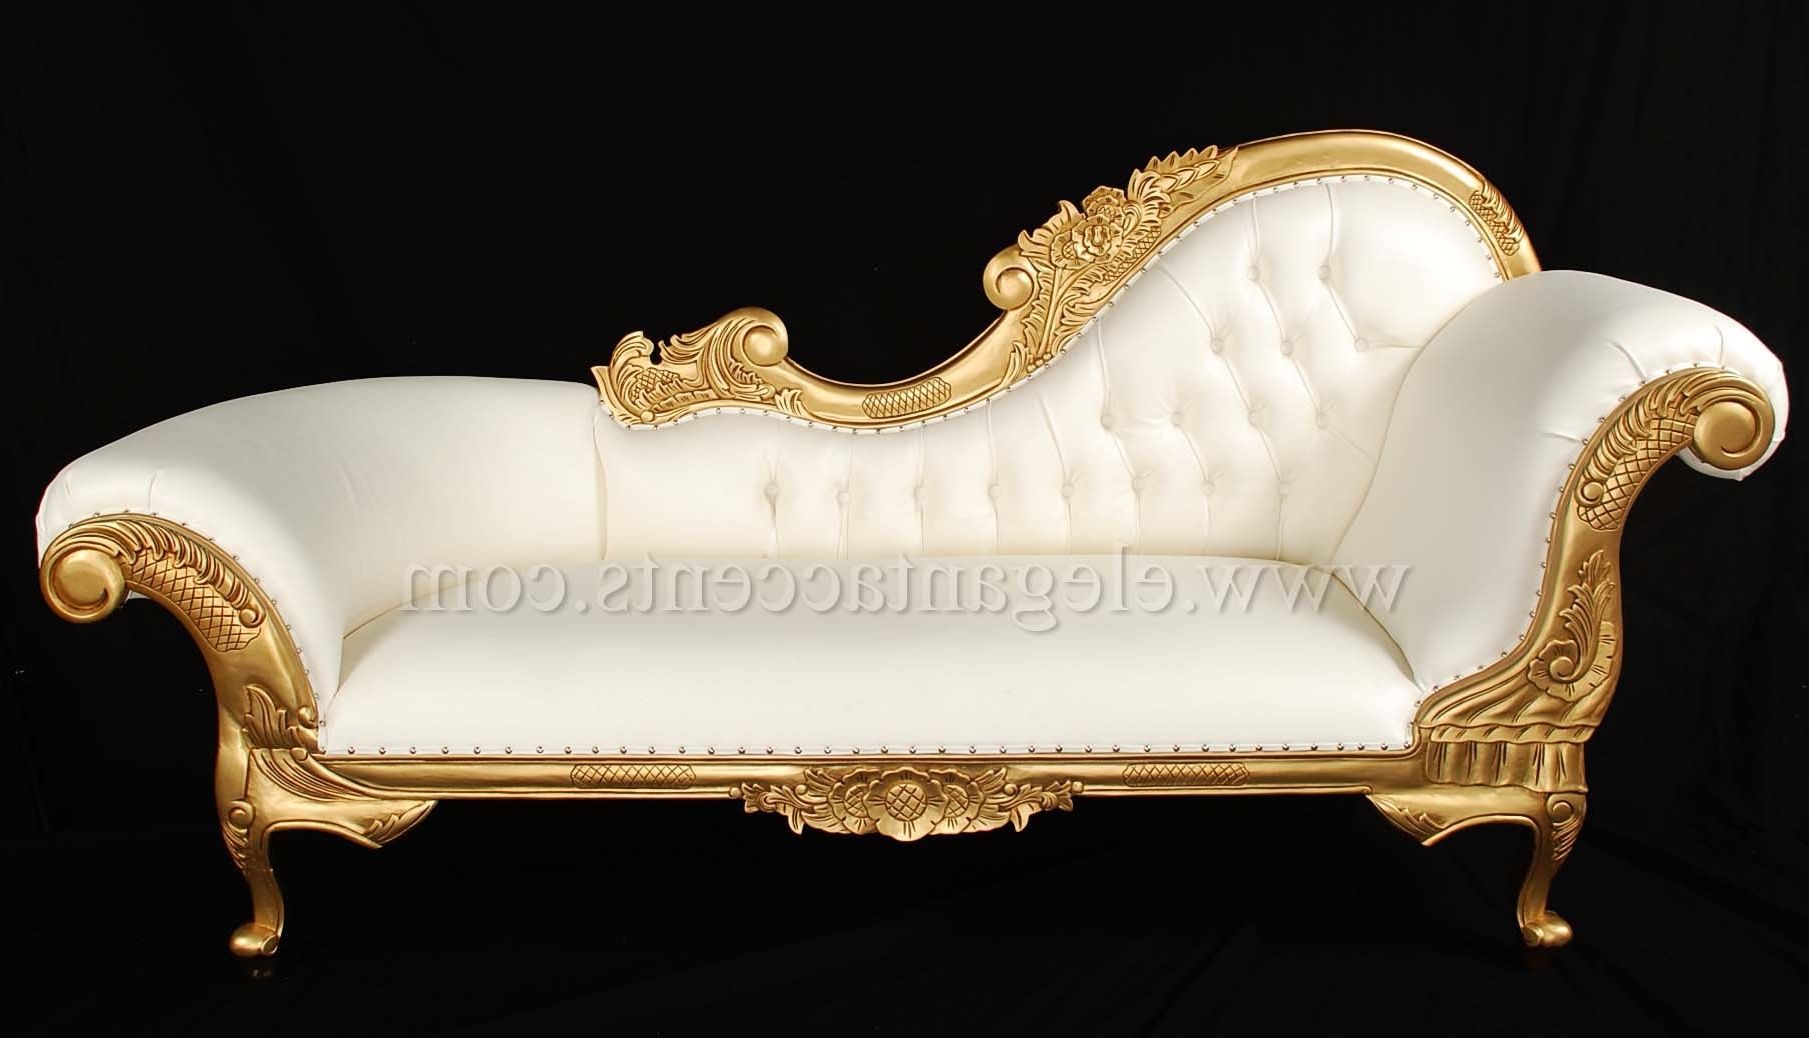 2018 Victorian Chaise Lounge Chairs Within This Truly Sumptuous "hood" Chaise Lounge, With Stylized Carving (View 9 of 15)